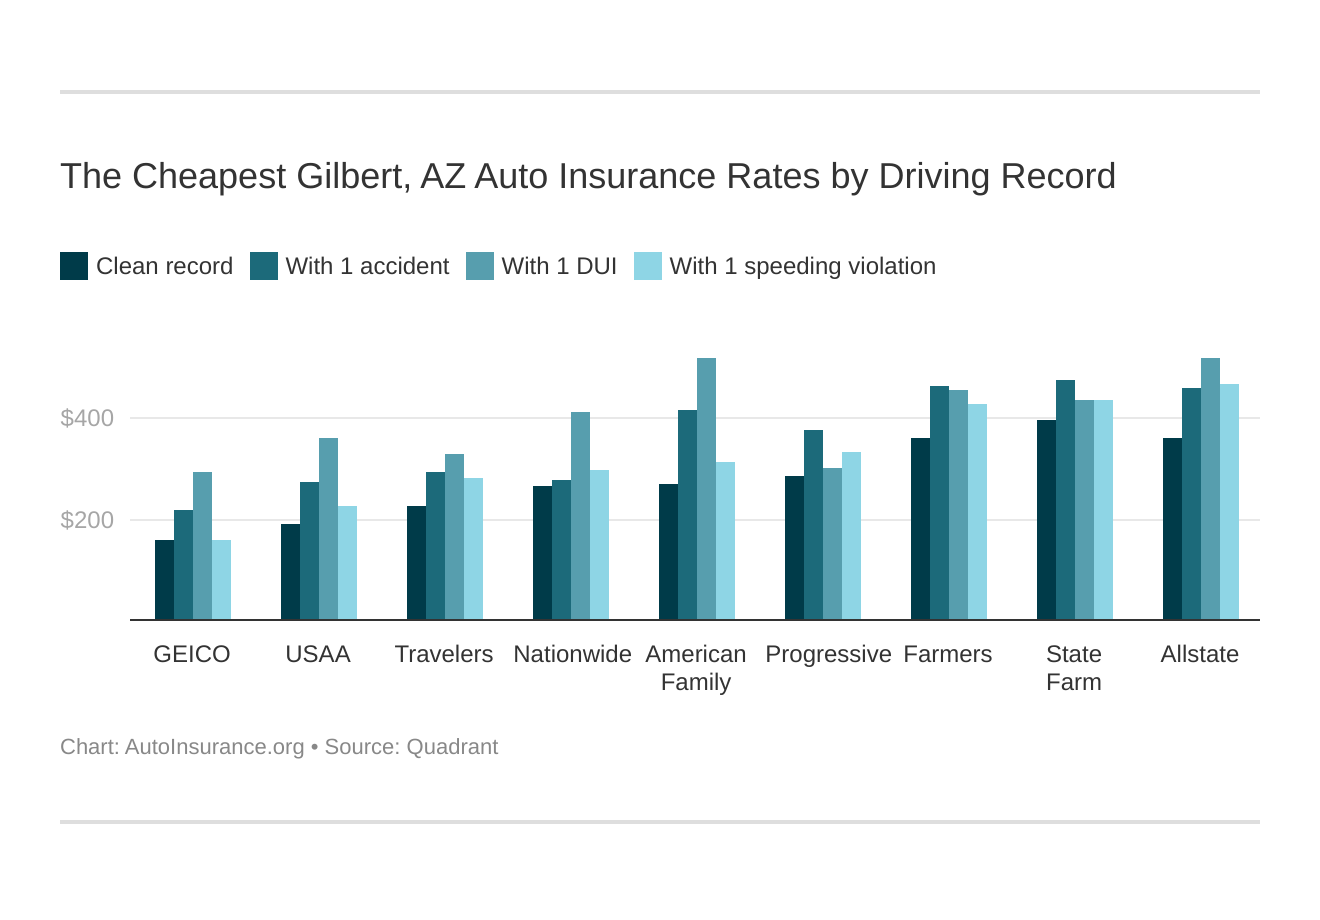 The Cheapest Gilbert, AZ Auto Insurance Rates by Driving Record